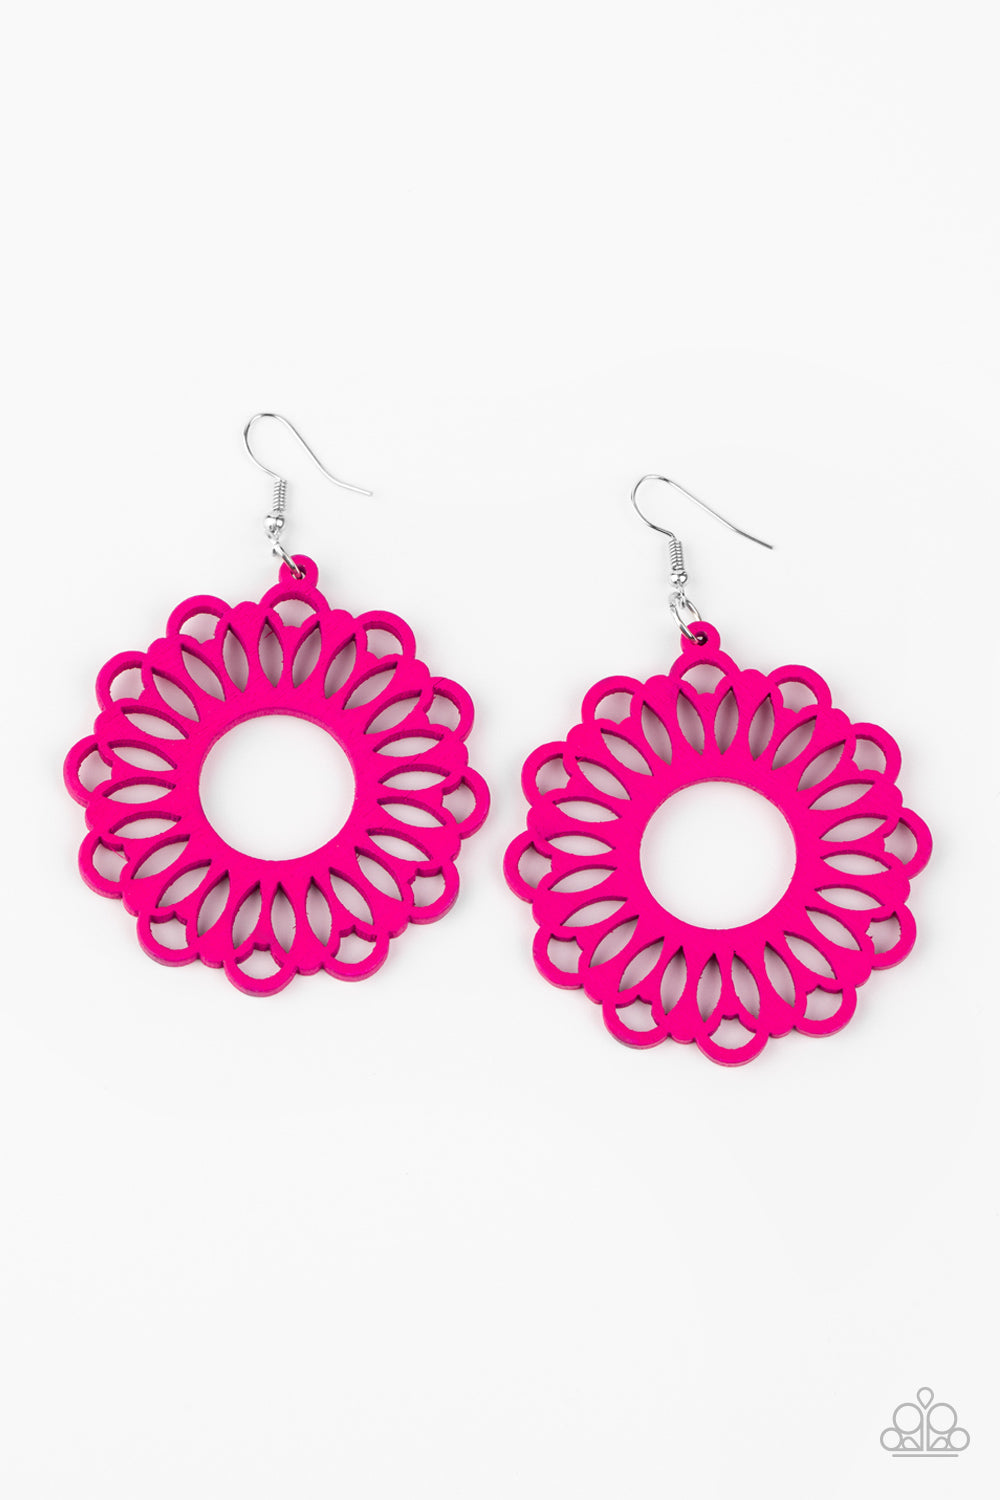 Paparazzi Dominican Daisy - Pink Wooden Peacock Earrings - A Finishing Touch 